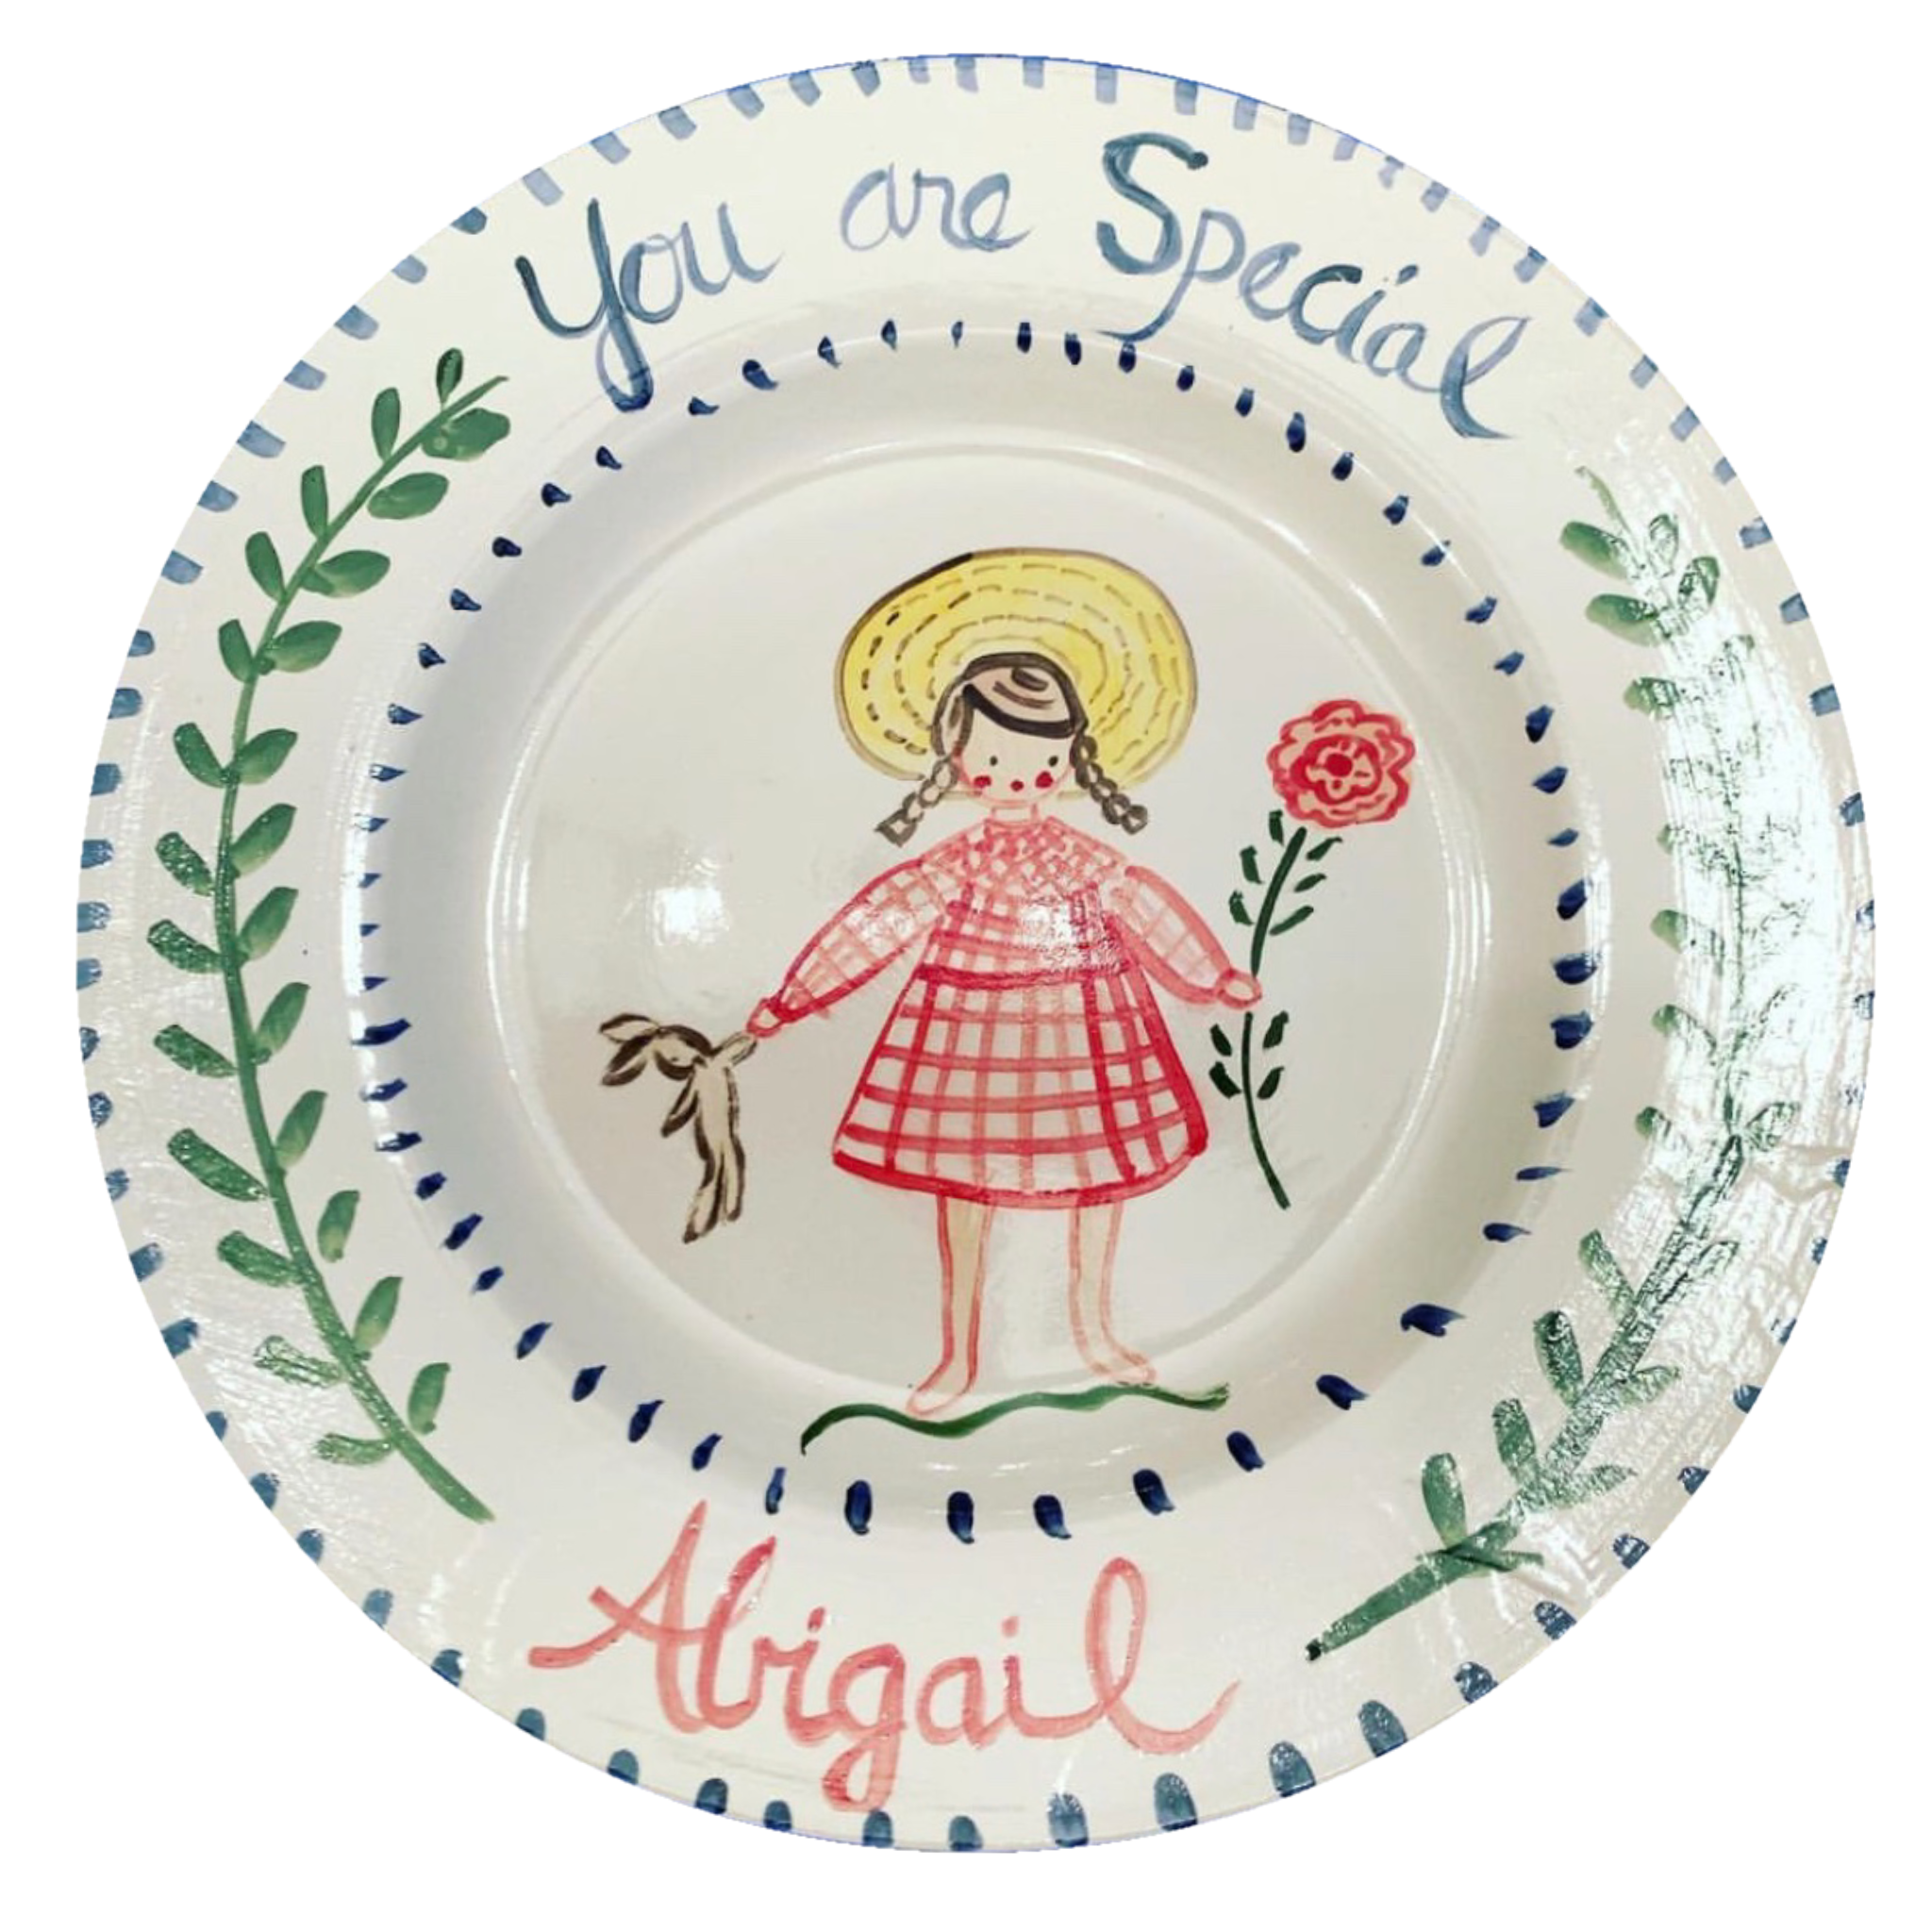 You are Special plate - Premium  from Tricia Lowenfield Shop 